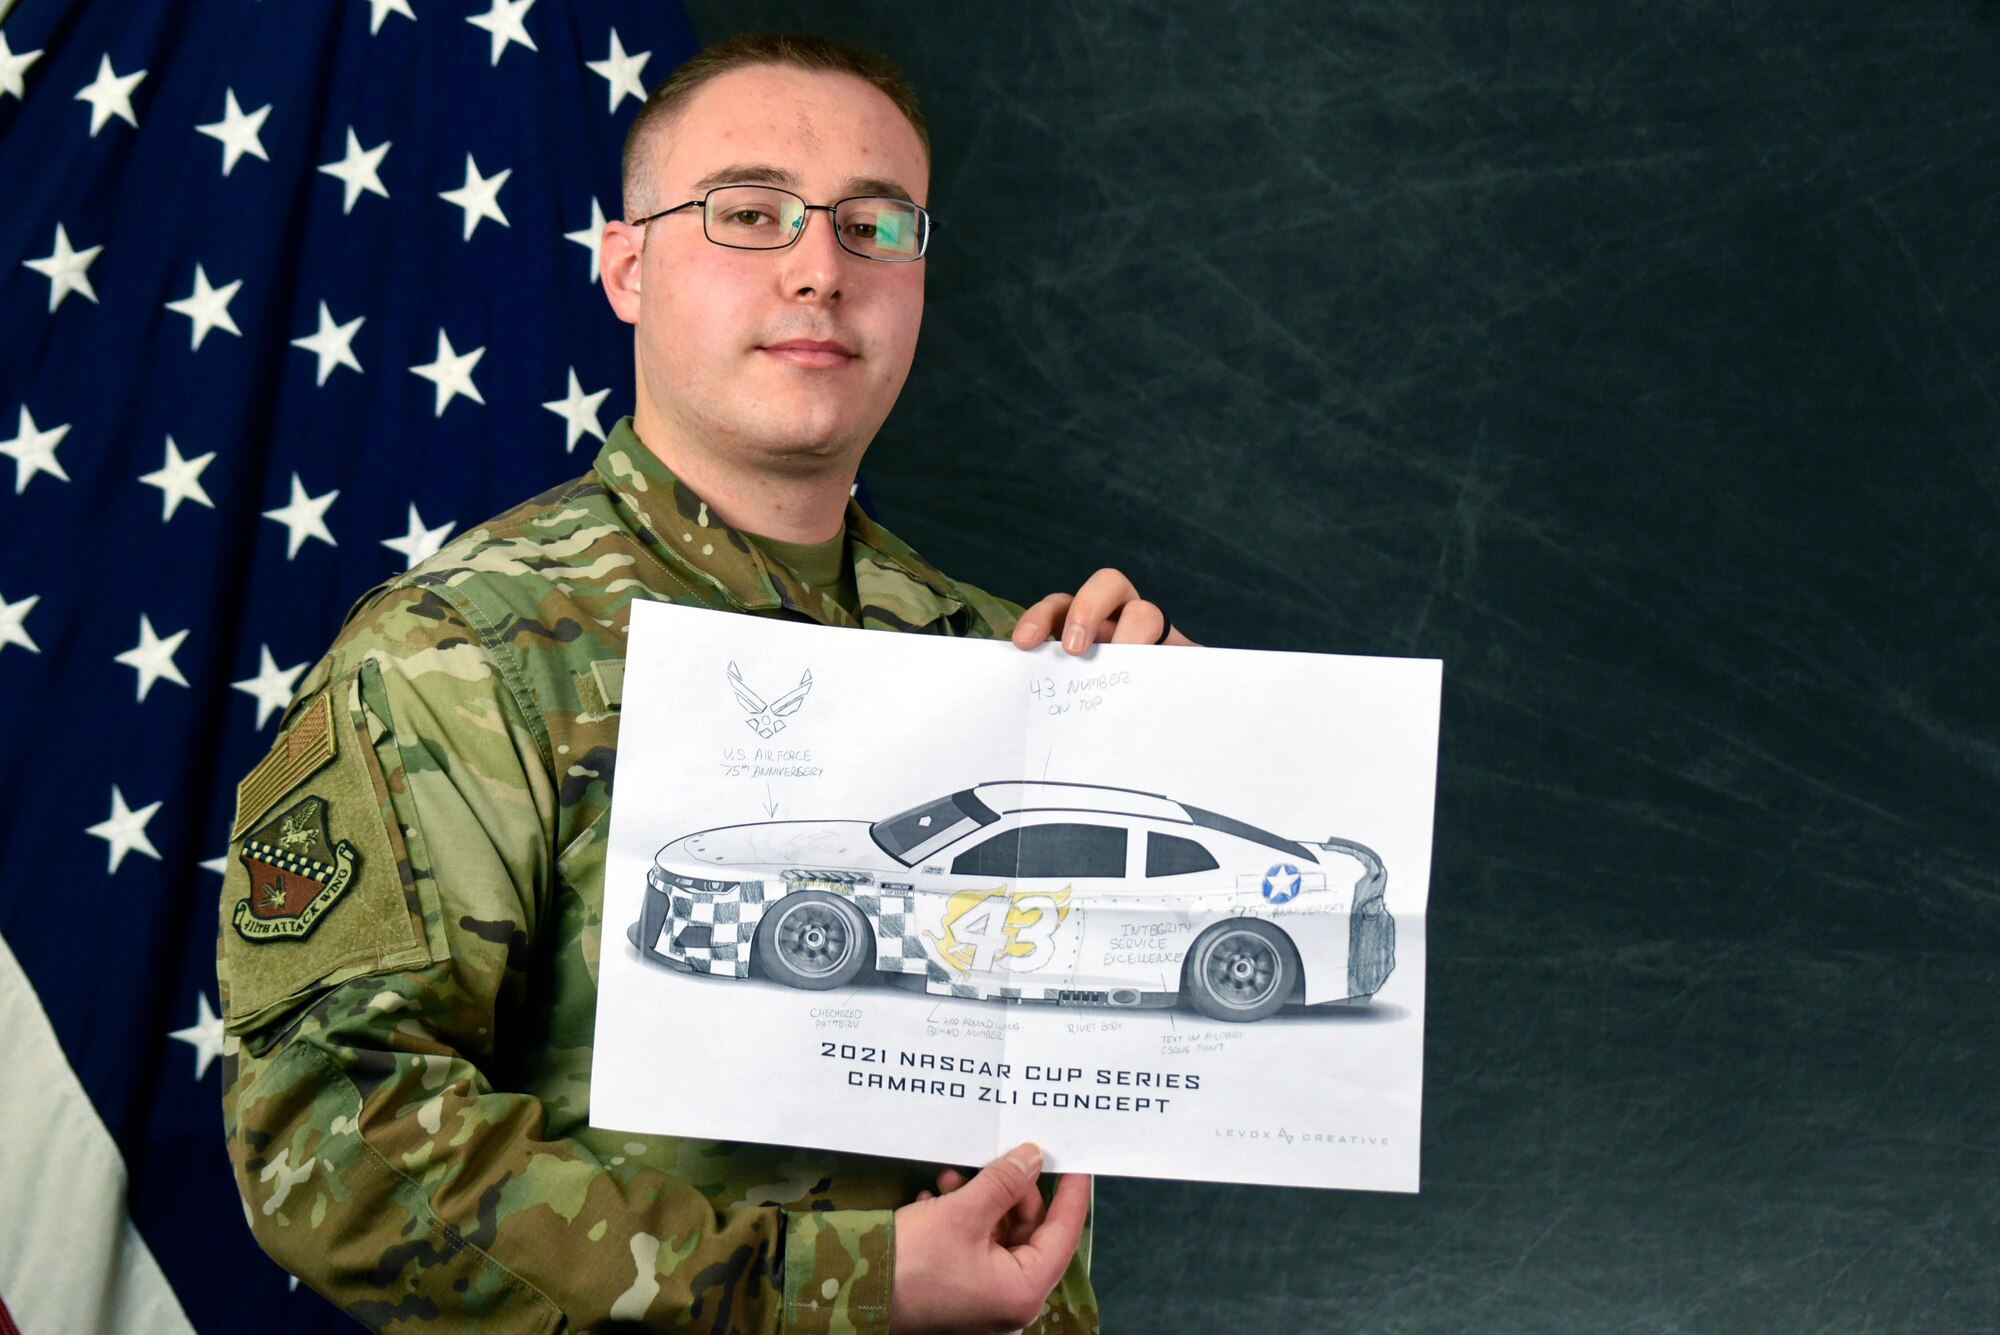 A man in Air Force uniform holding a drawing in front of a flag.